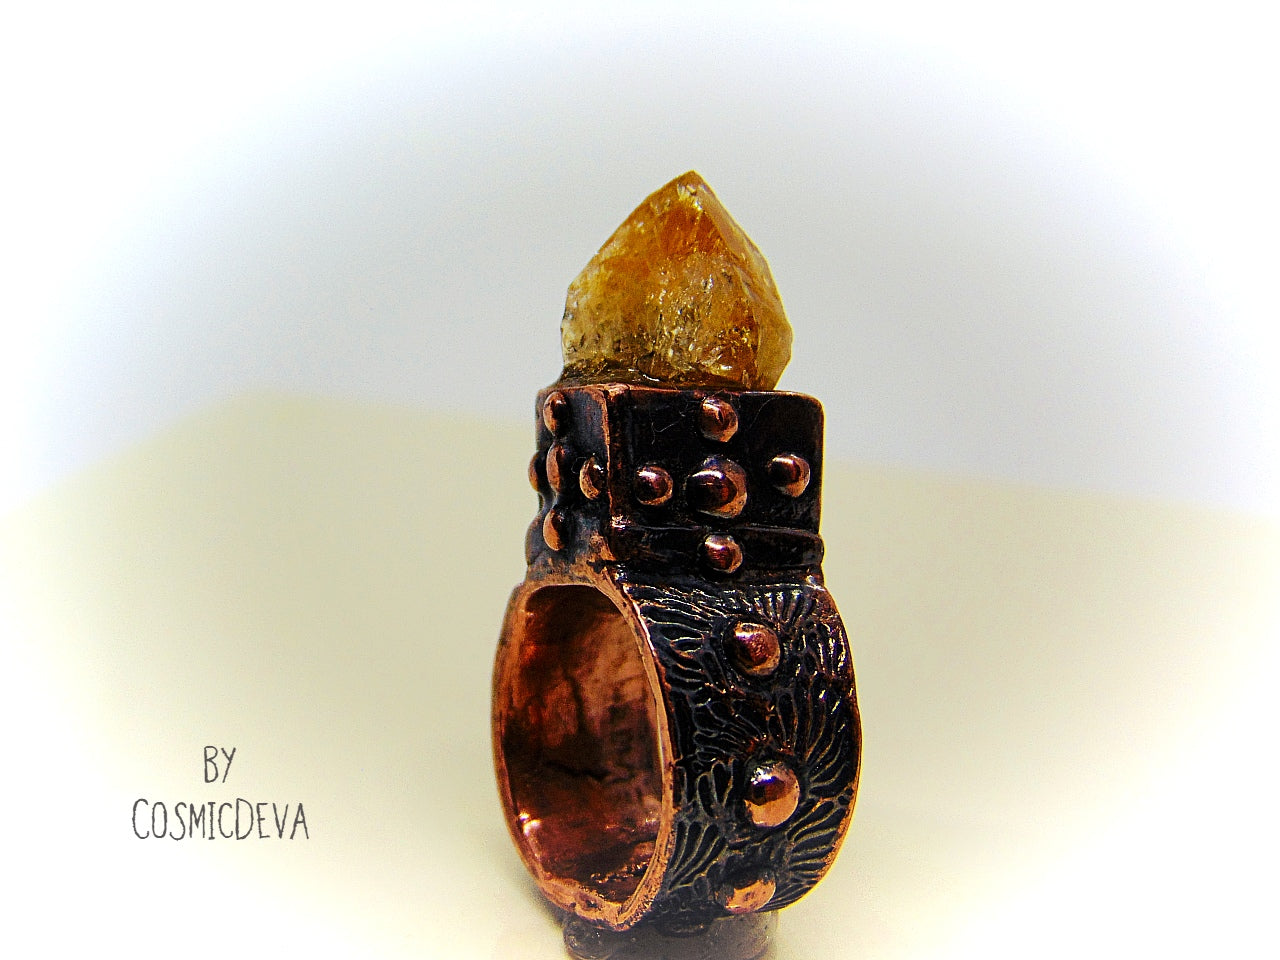 Raw Citrine Crystal Point Medieval Copper Ring, US Size 6.5 Ring, This unique medieval handmade and kiln fired ring is made of pure copper with a golden raw citrine crystal point. This rough Citrine gemstone is a November birthstone. Comes in a beautiful gift box. Treat yourself or a loved one! - CosmicDeva